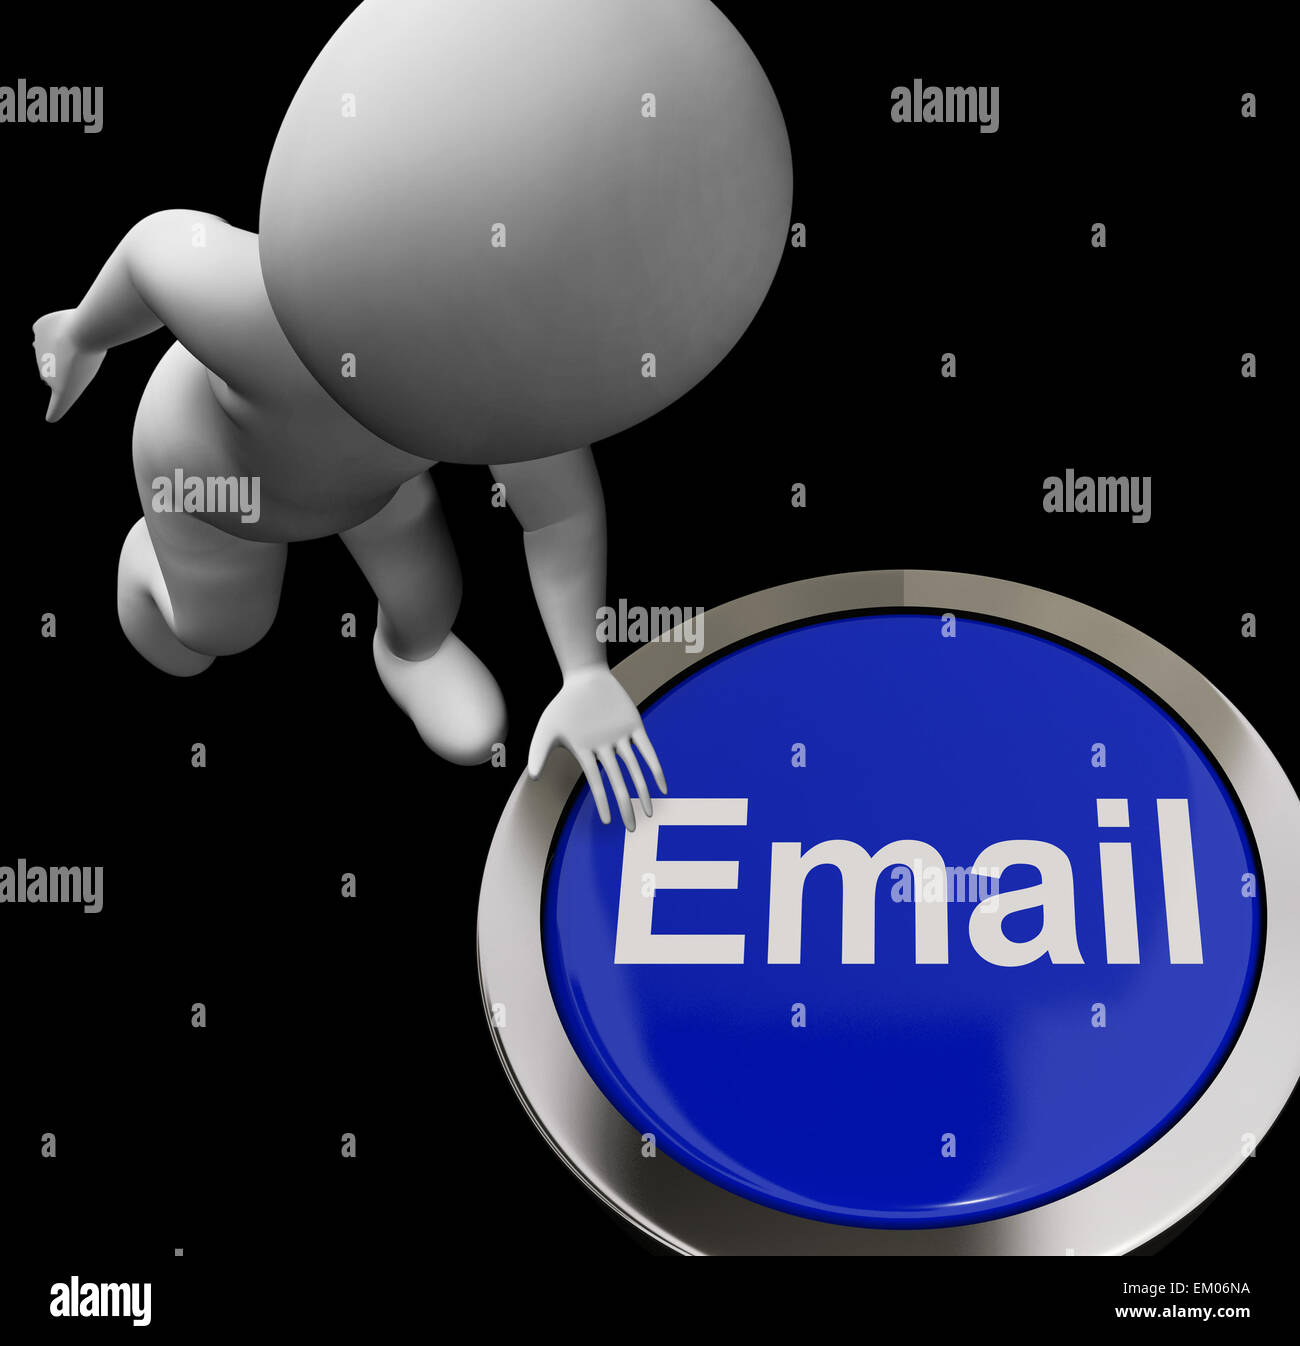 Email Button For Emailing And Internet Communication Stock Photo